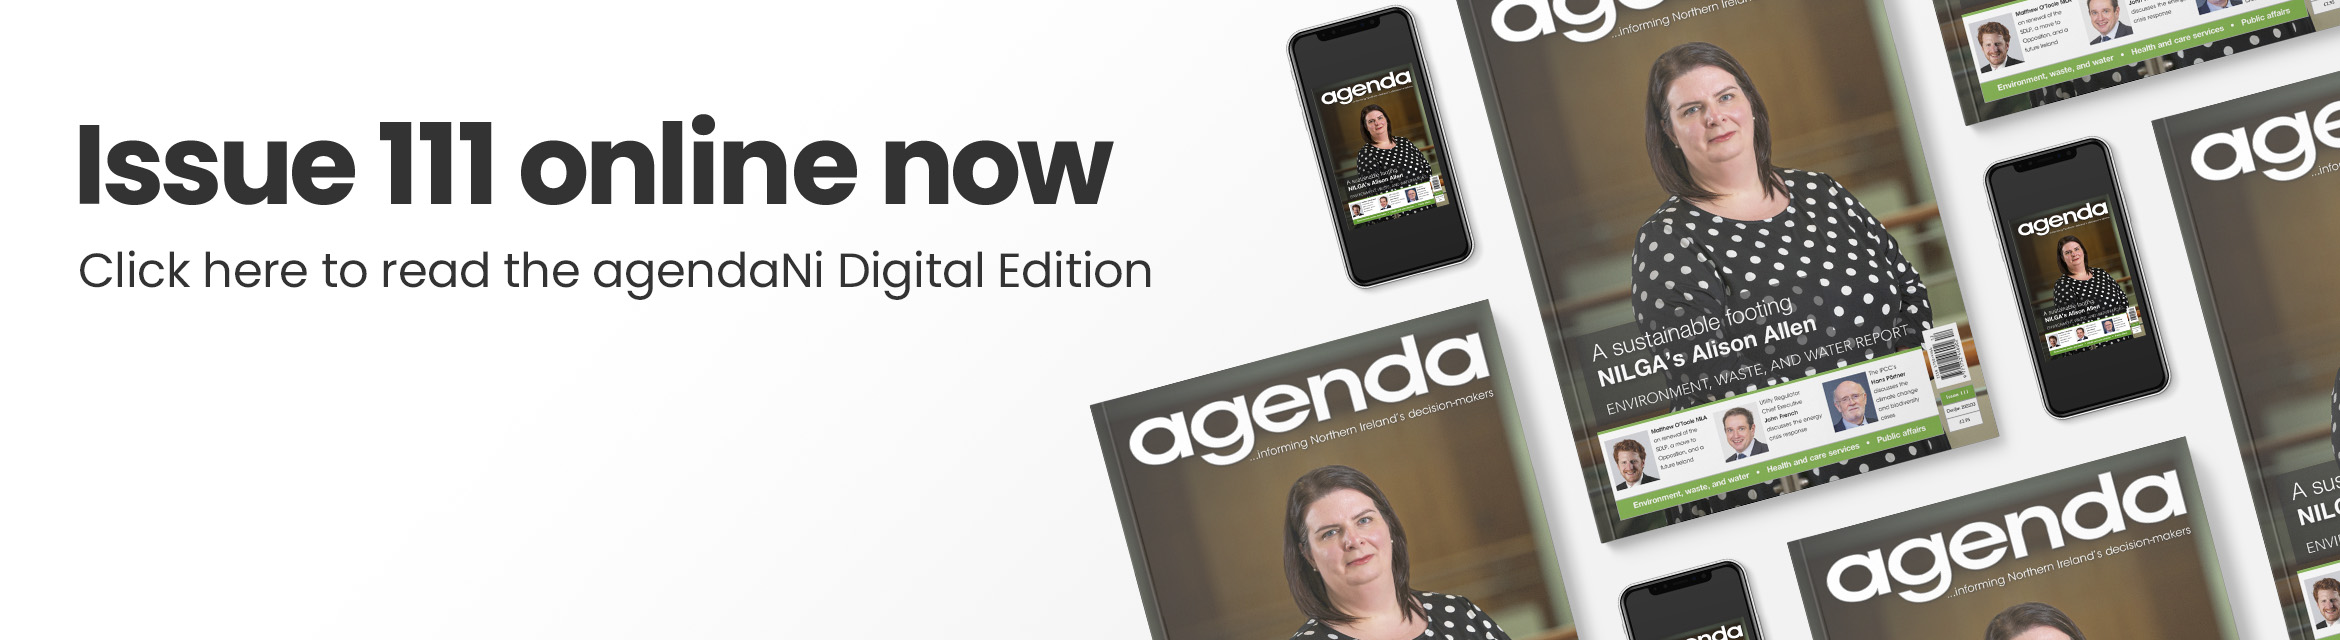 Issue 111 online now. Click here to read the agendaNi Digital Edition.